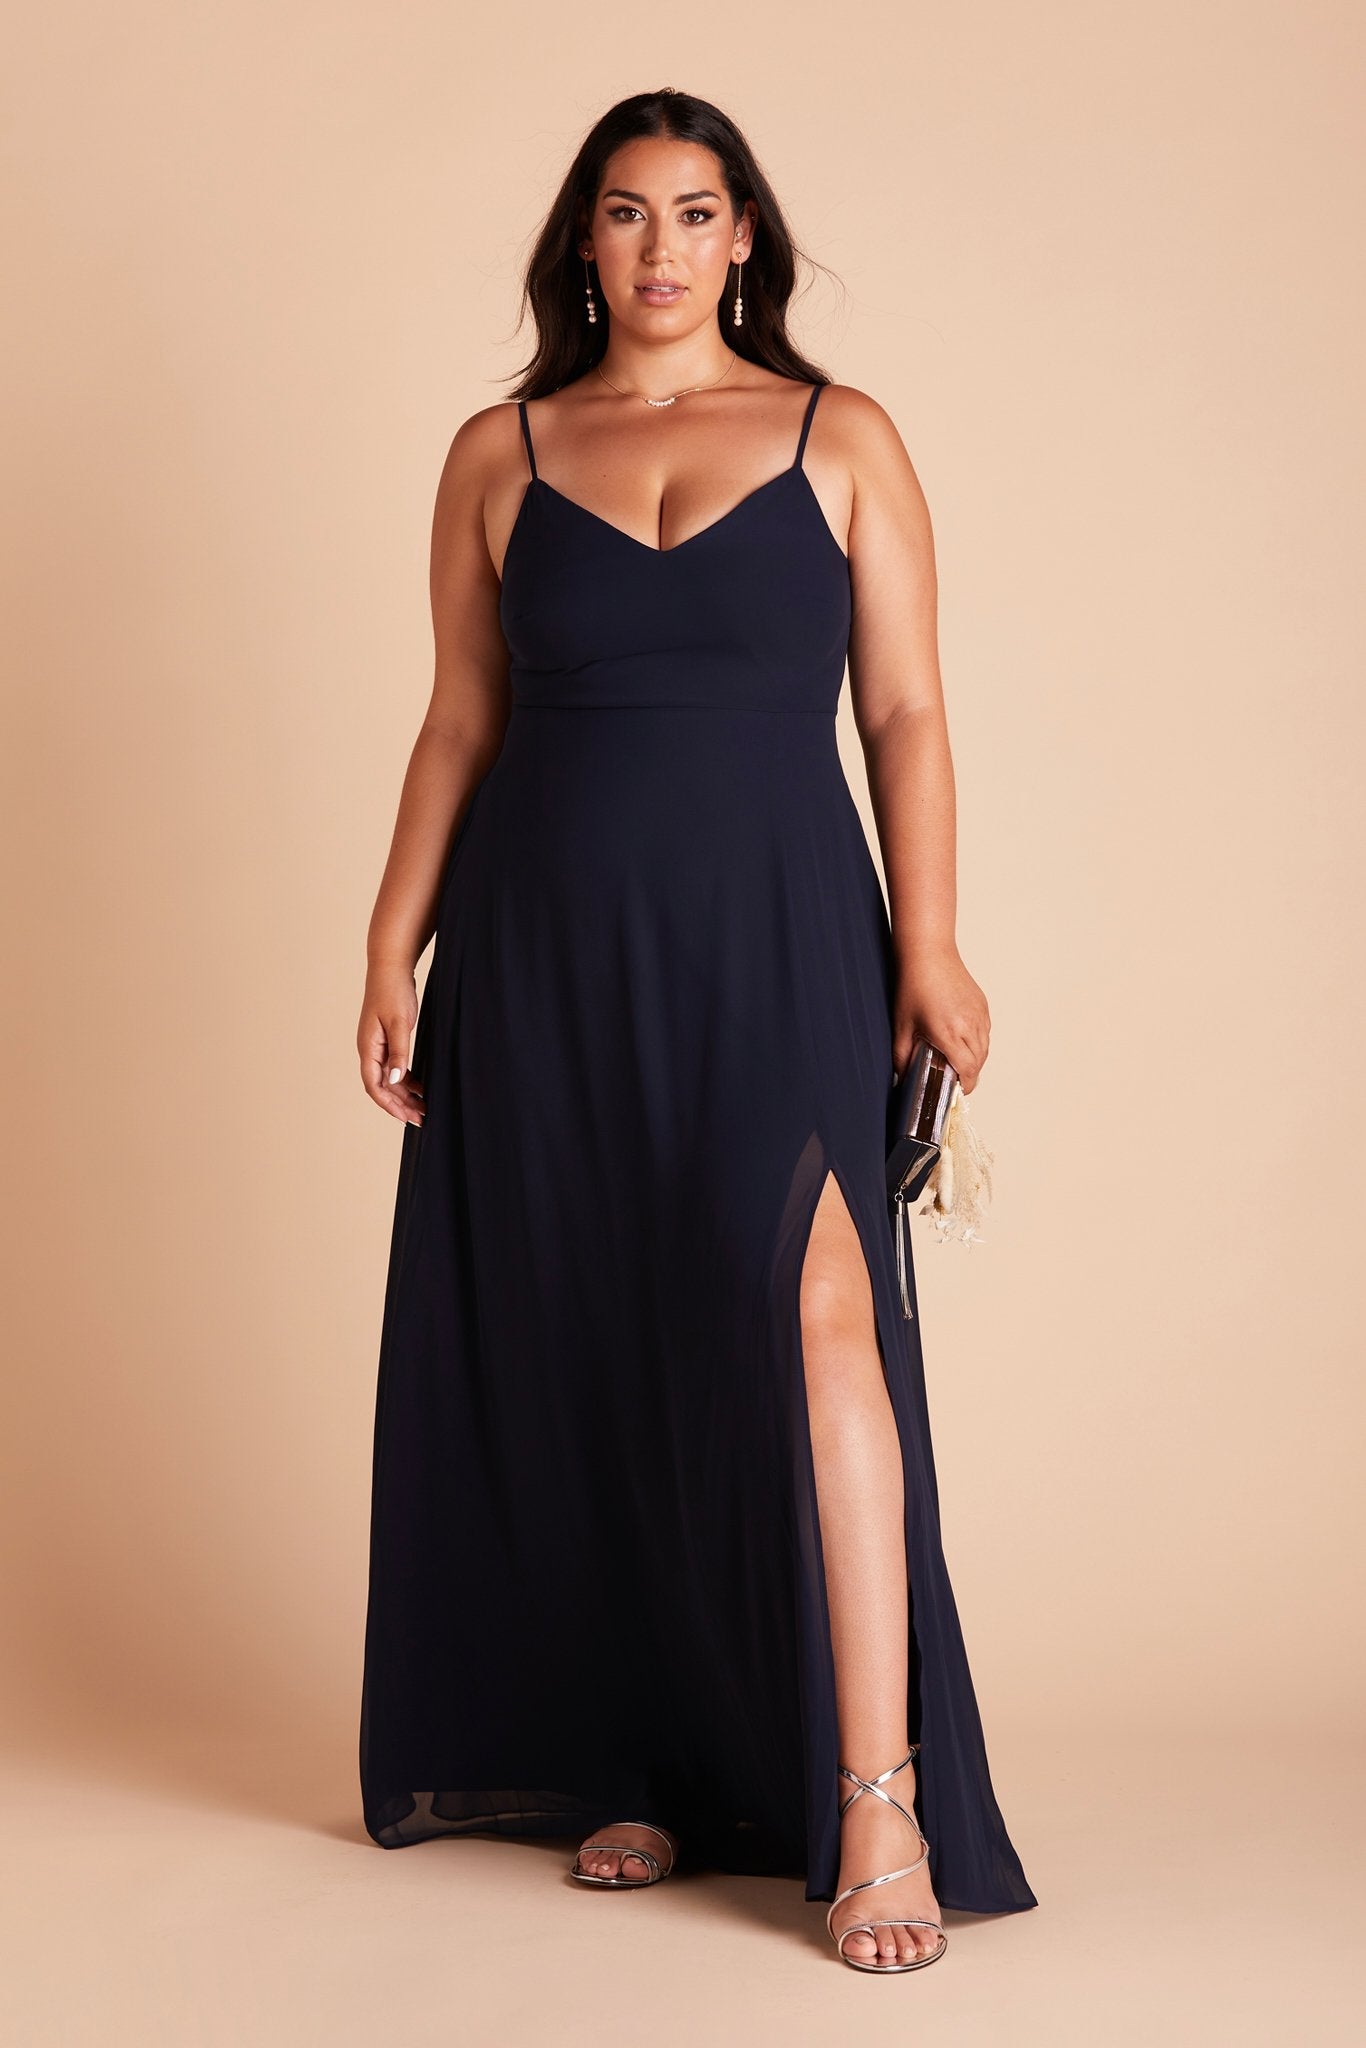 Devin convertible plus size bridesmaids dress with slit in navy blue chiffon by Birdy Grey, front view